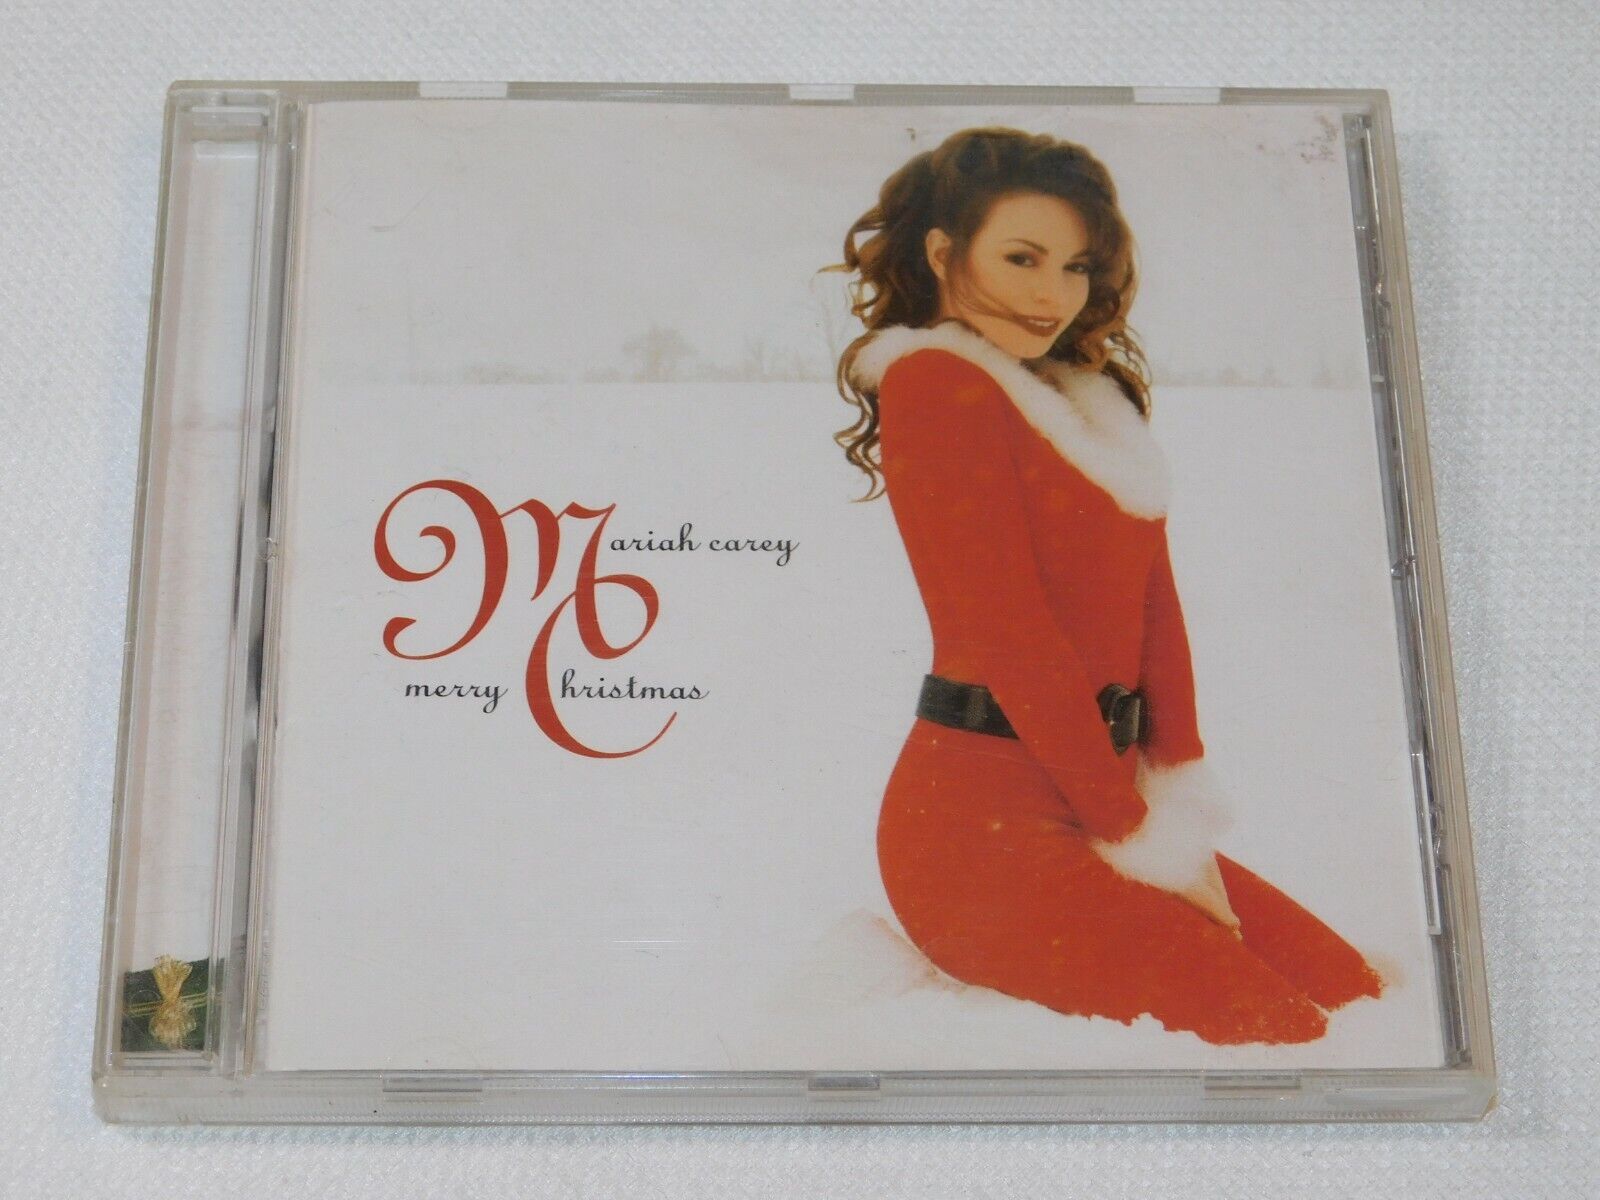 Primary image for Merry Christmas by Mariah Carey (CD, 1994, Columbia Records) Jesus Oh What a Won